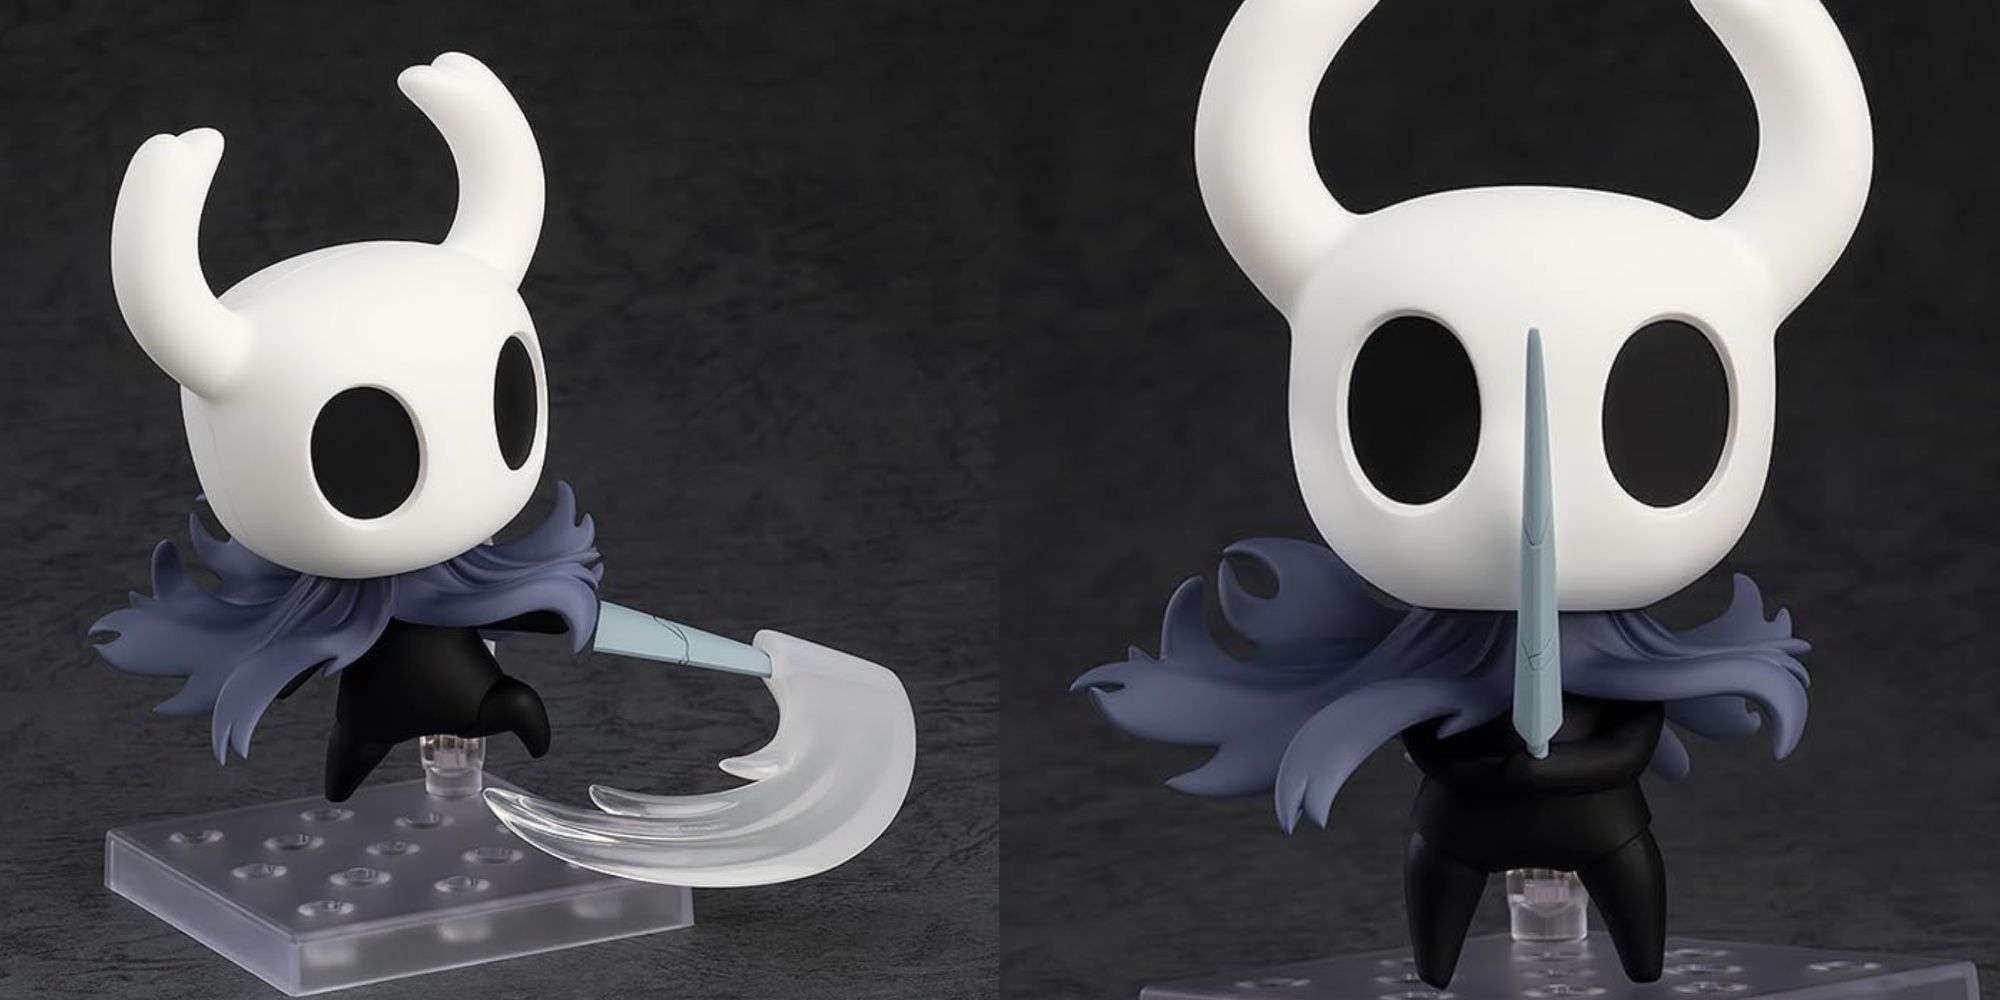 hollow knight nendoroid swinging and holding its sword